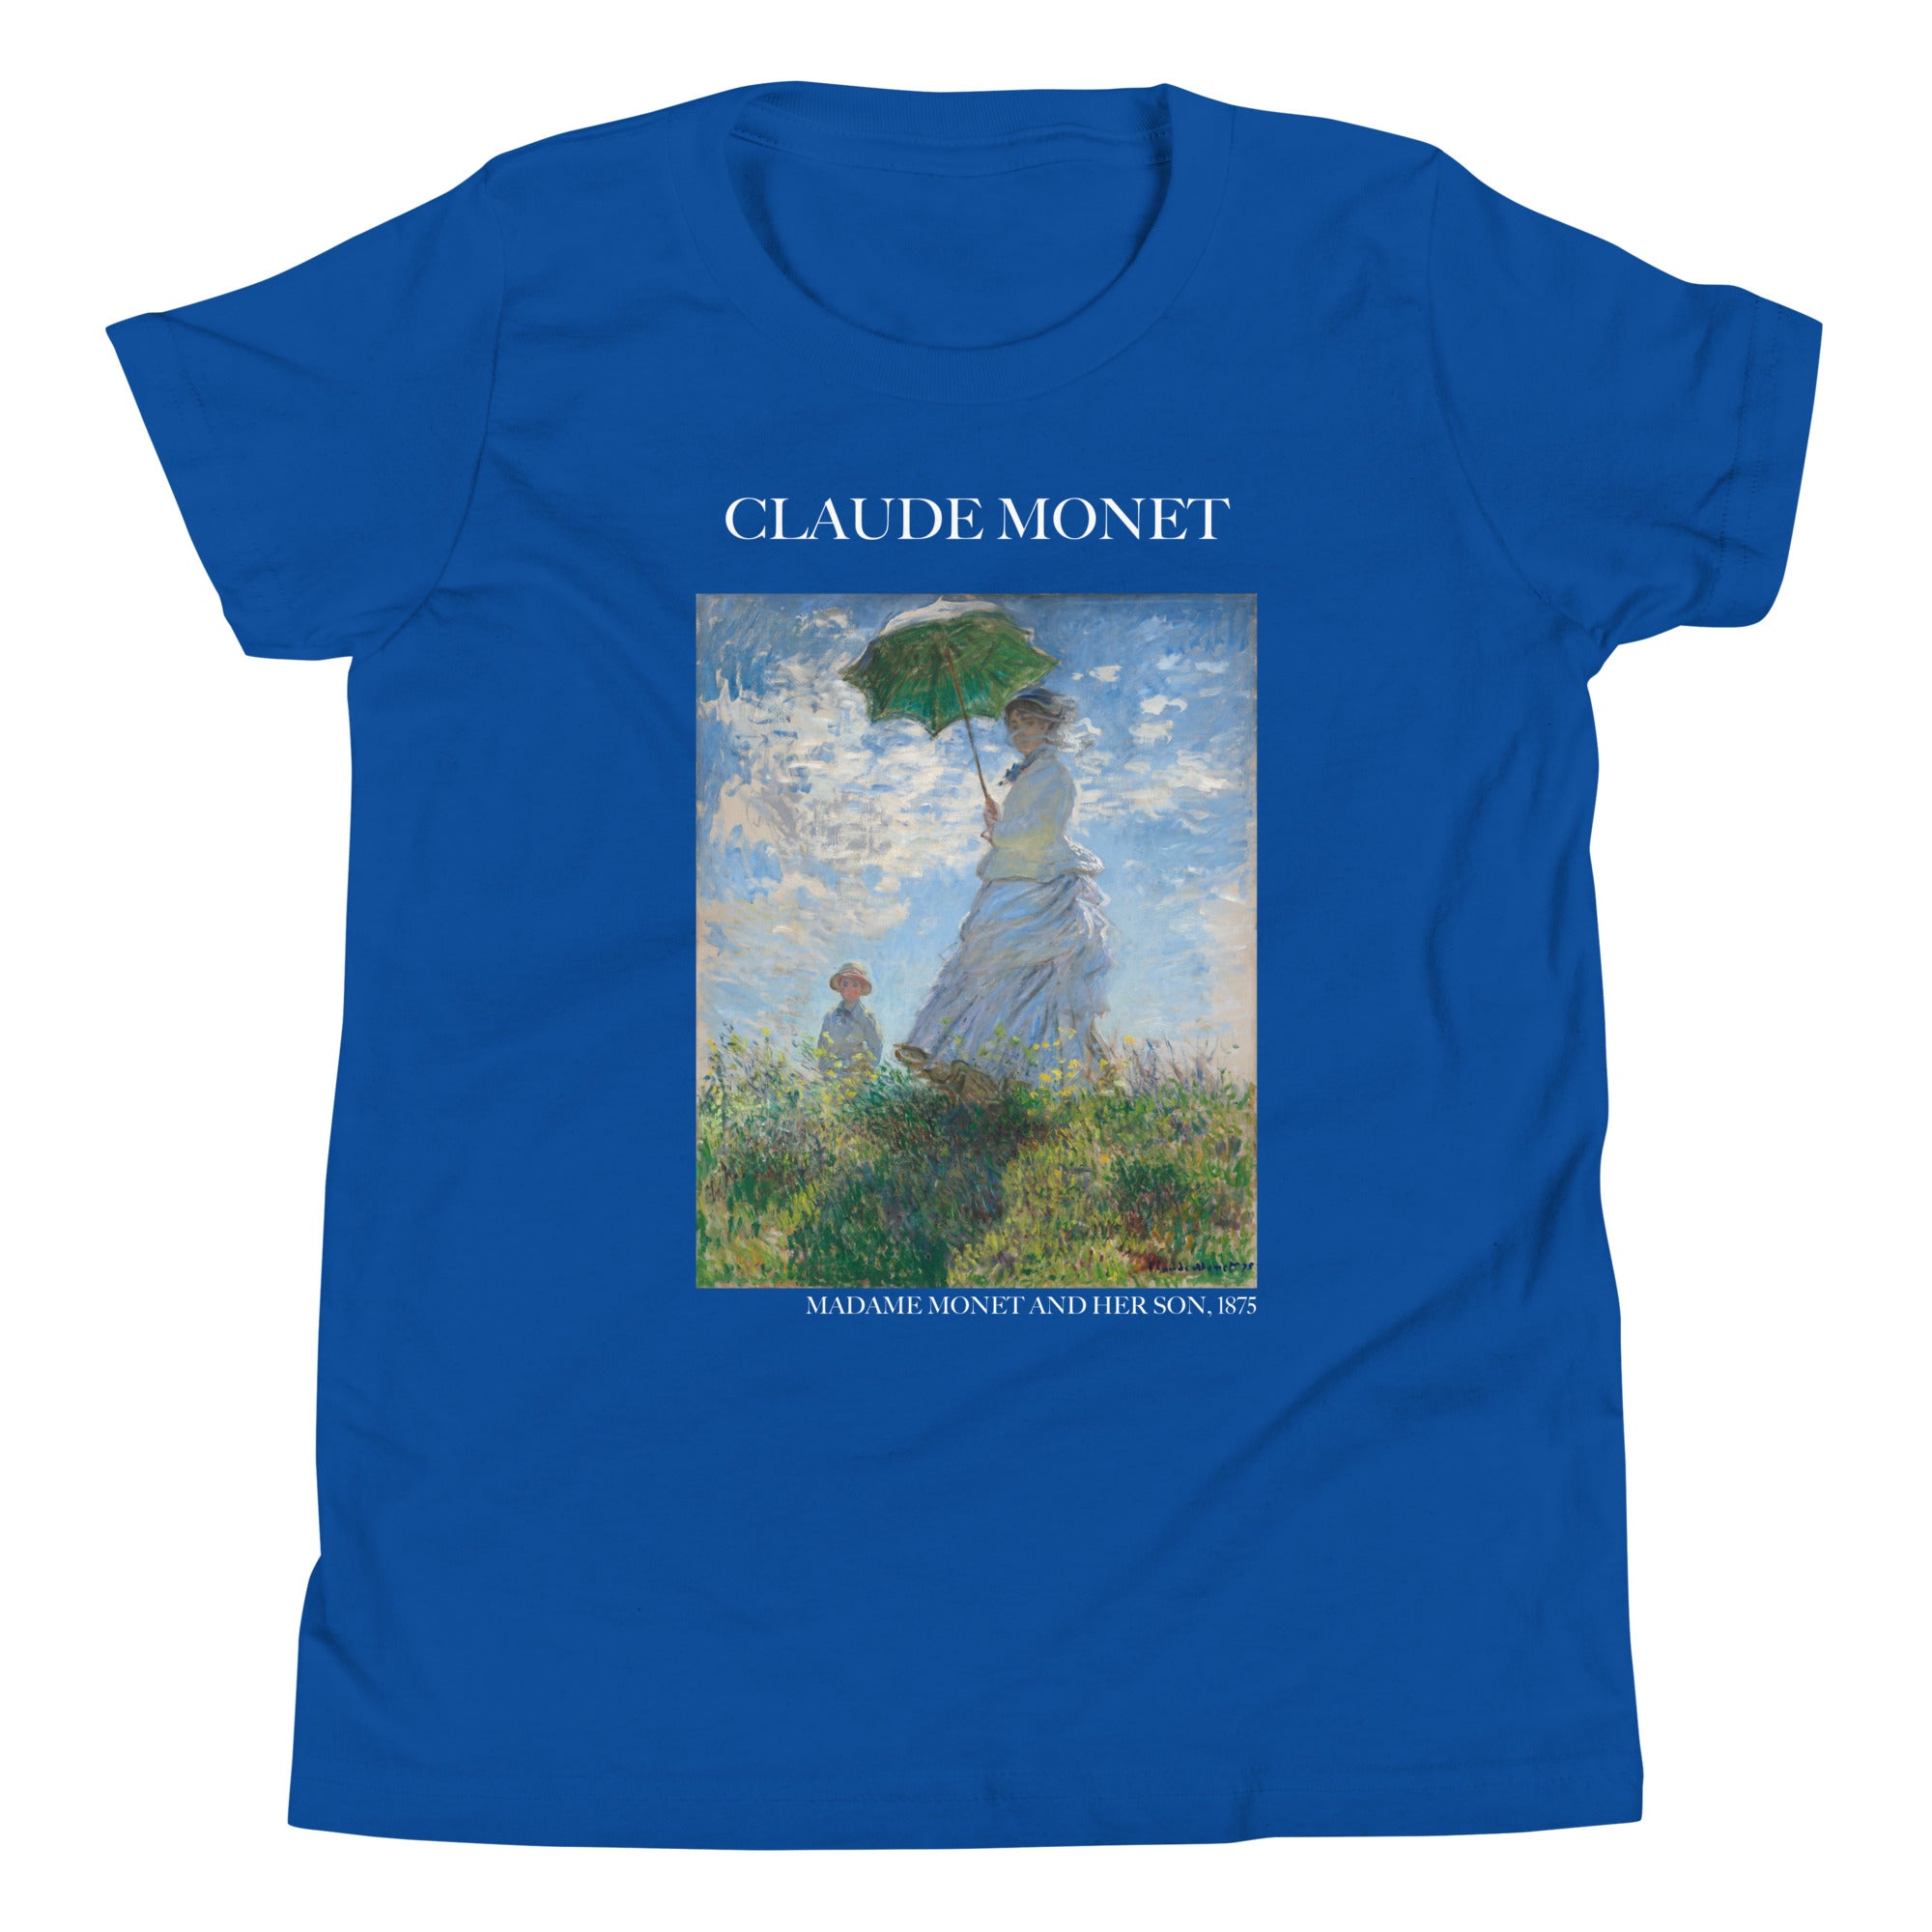 Claude Monet 'Madame Monet and Her Son' Famous Painting Short Sleeve T-Shirt | Premium Youth Art Tee